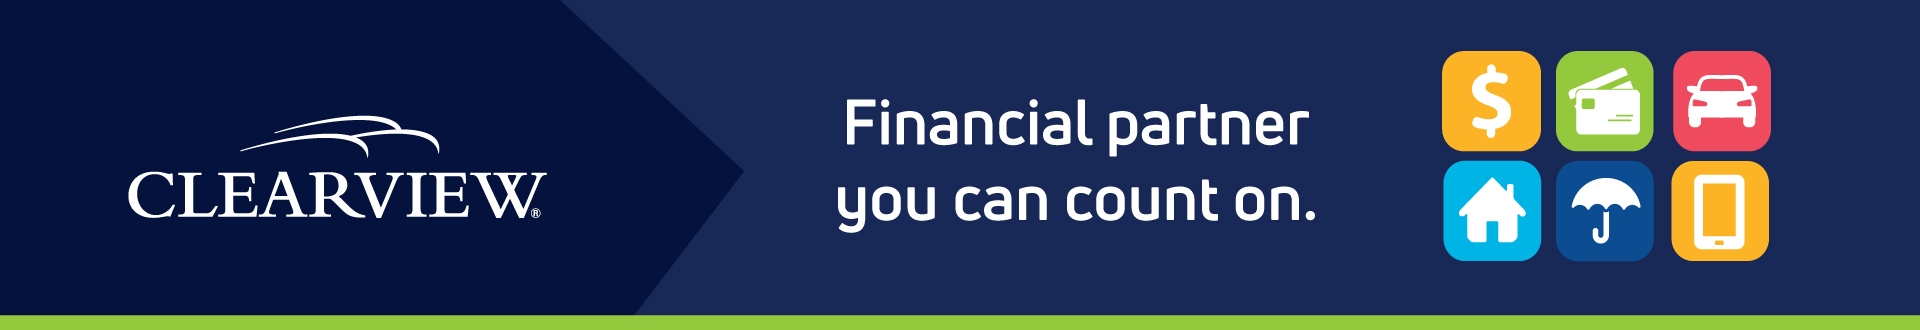 Clearview - Financial partner you can count on.